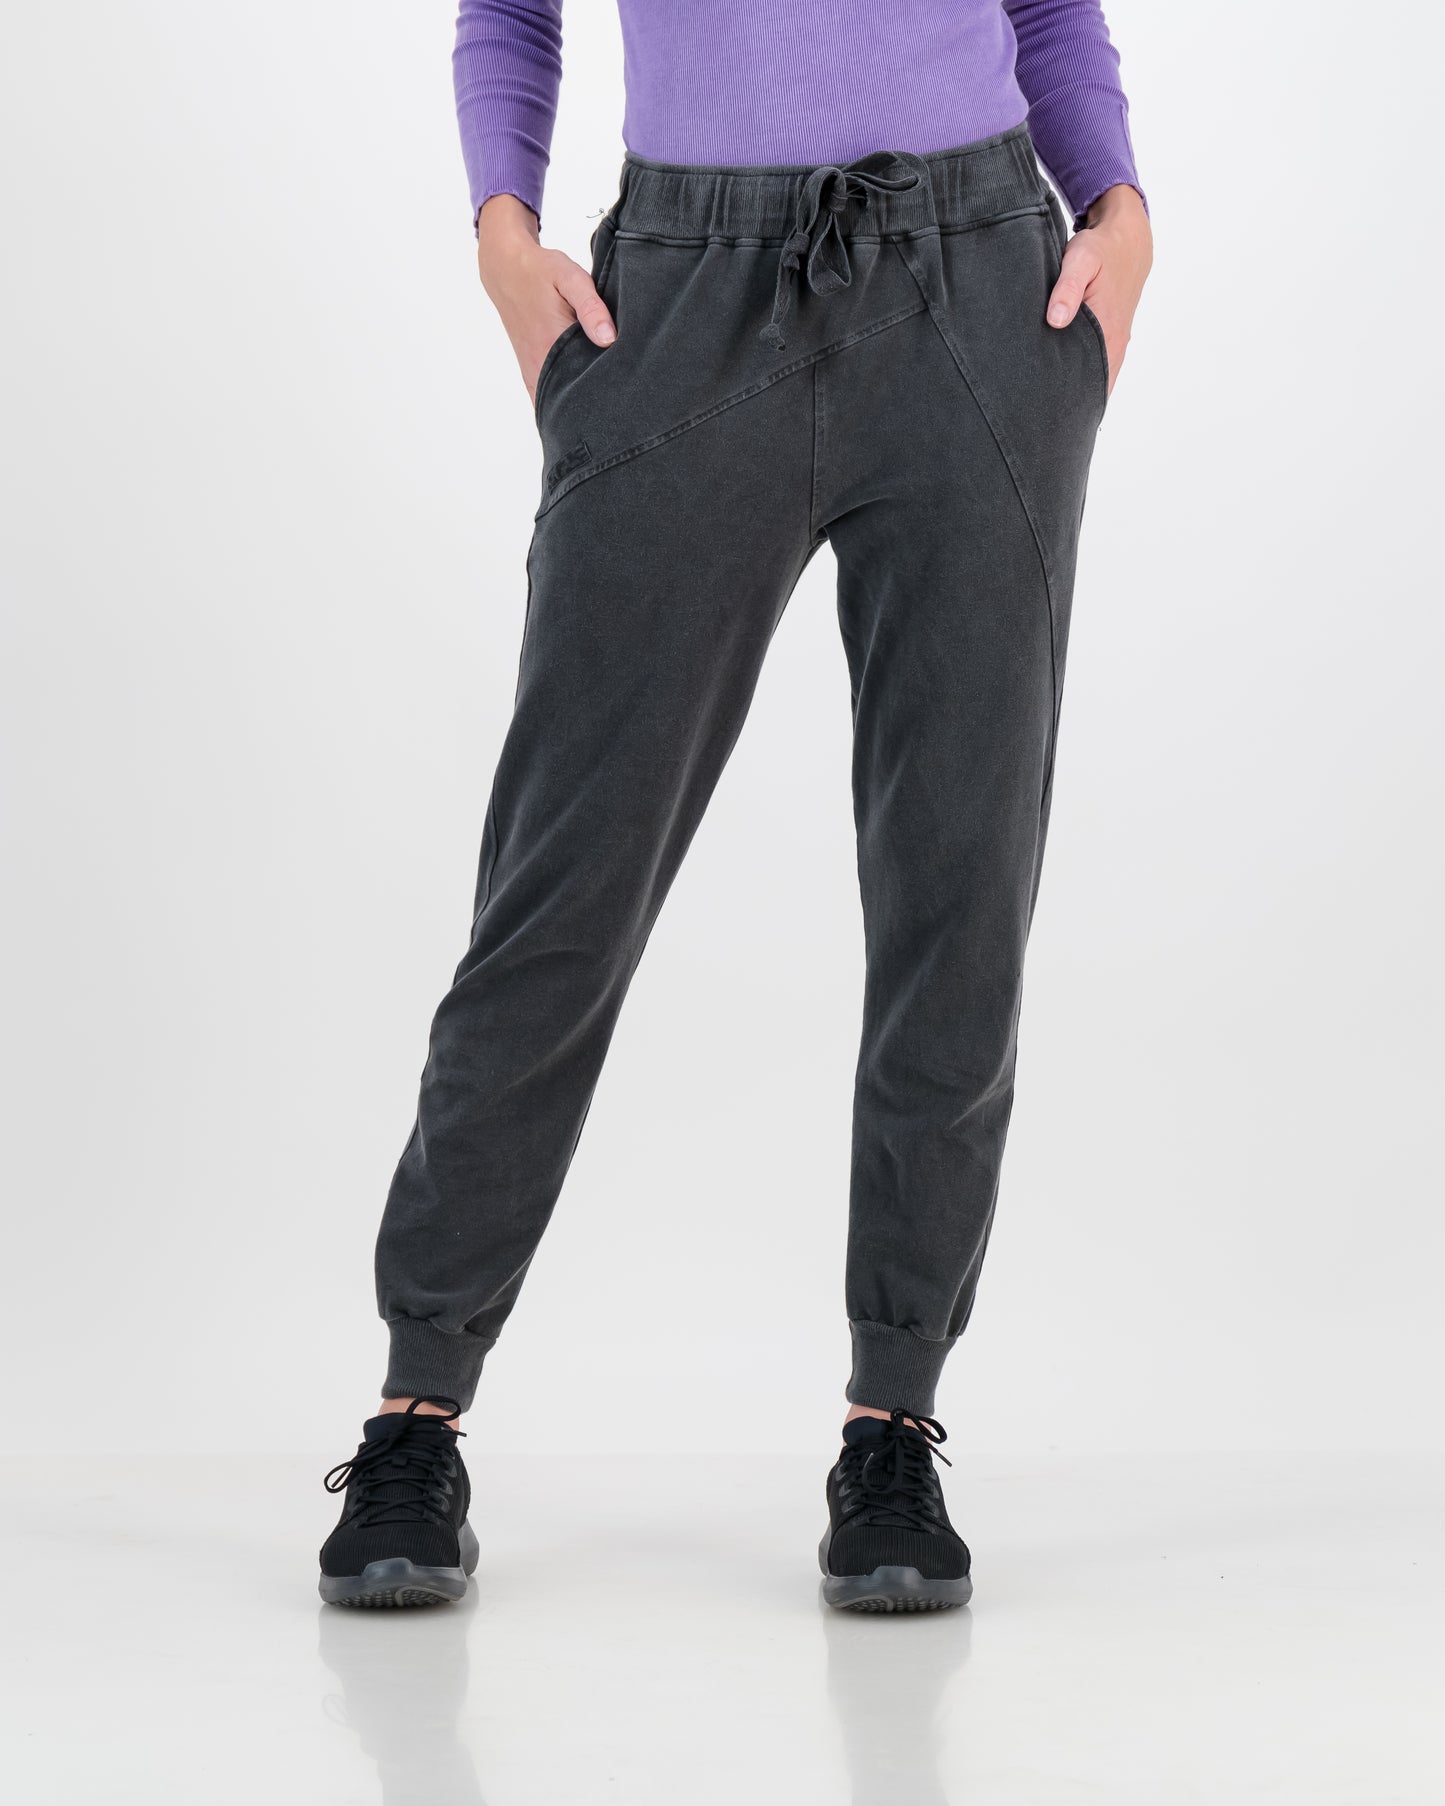 Trackpants Cotton Overdyed - Charcoal